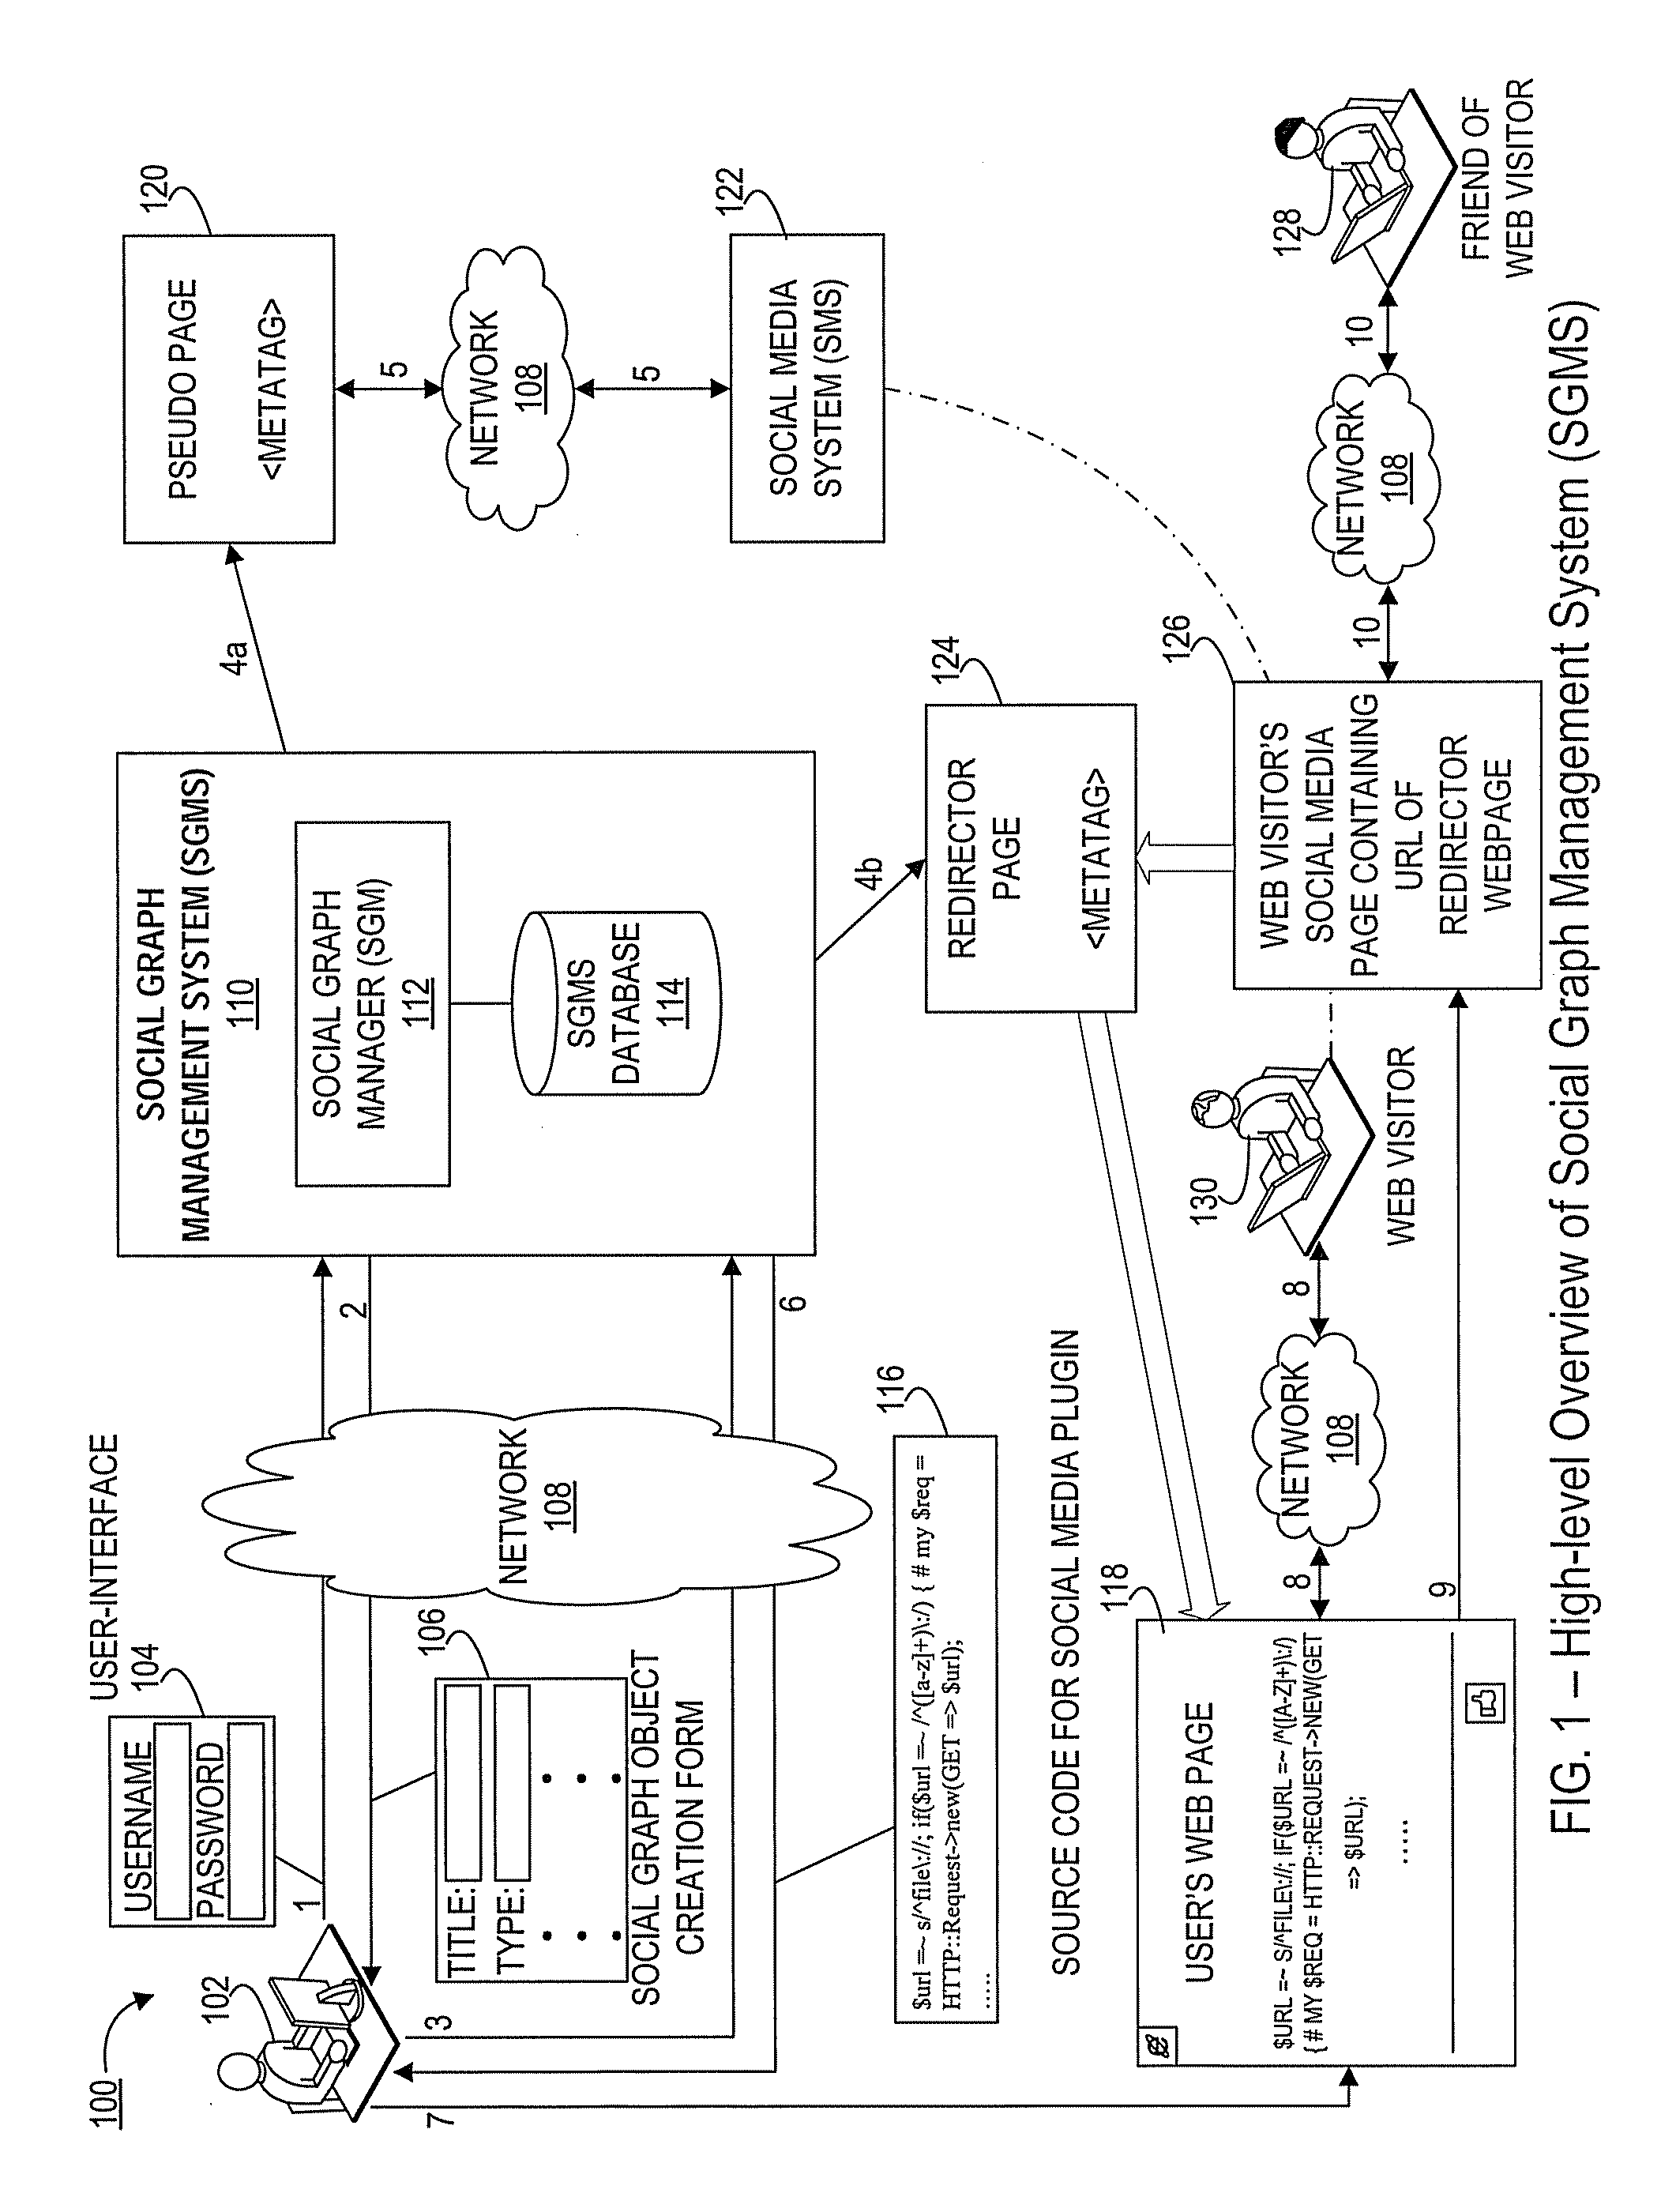 Systems and methods for associating social media systems and web pages